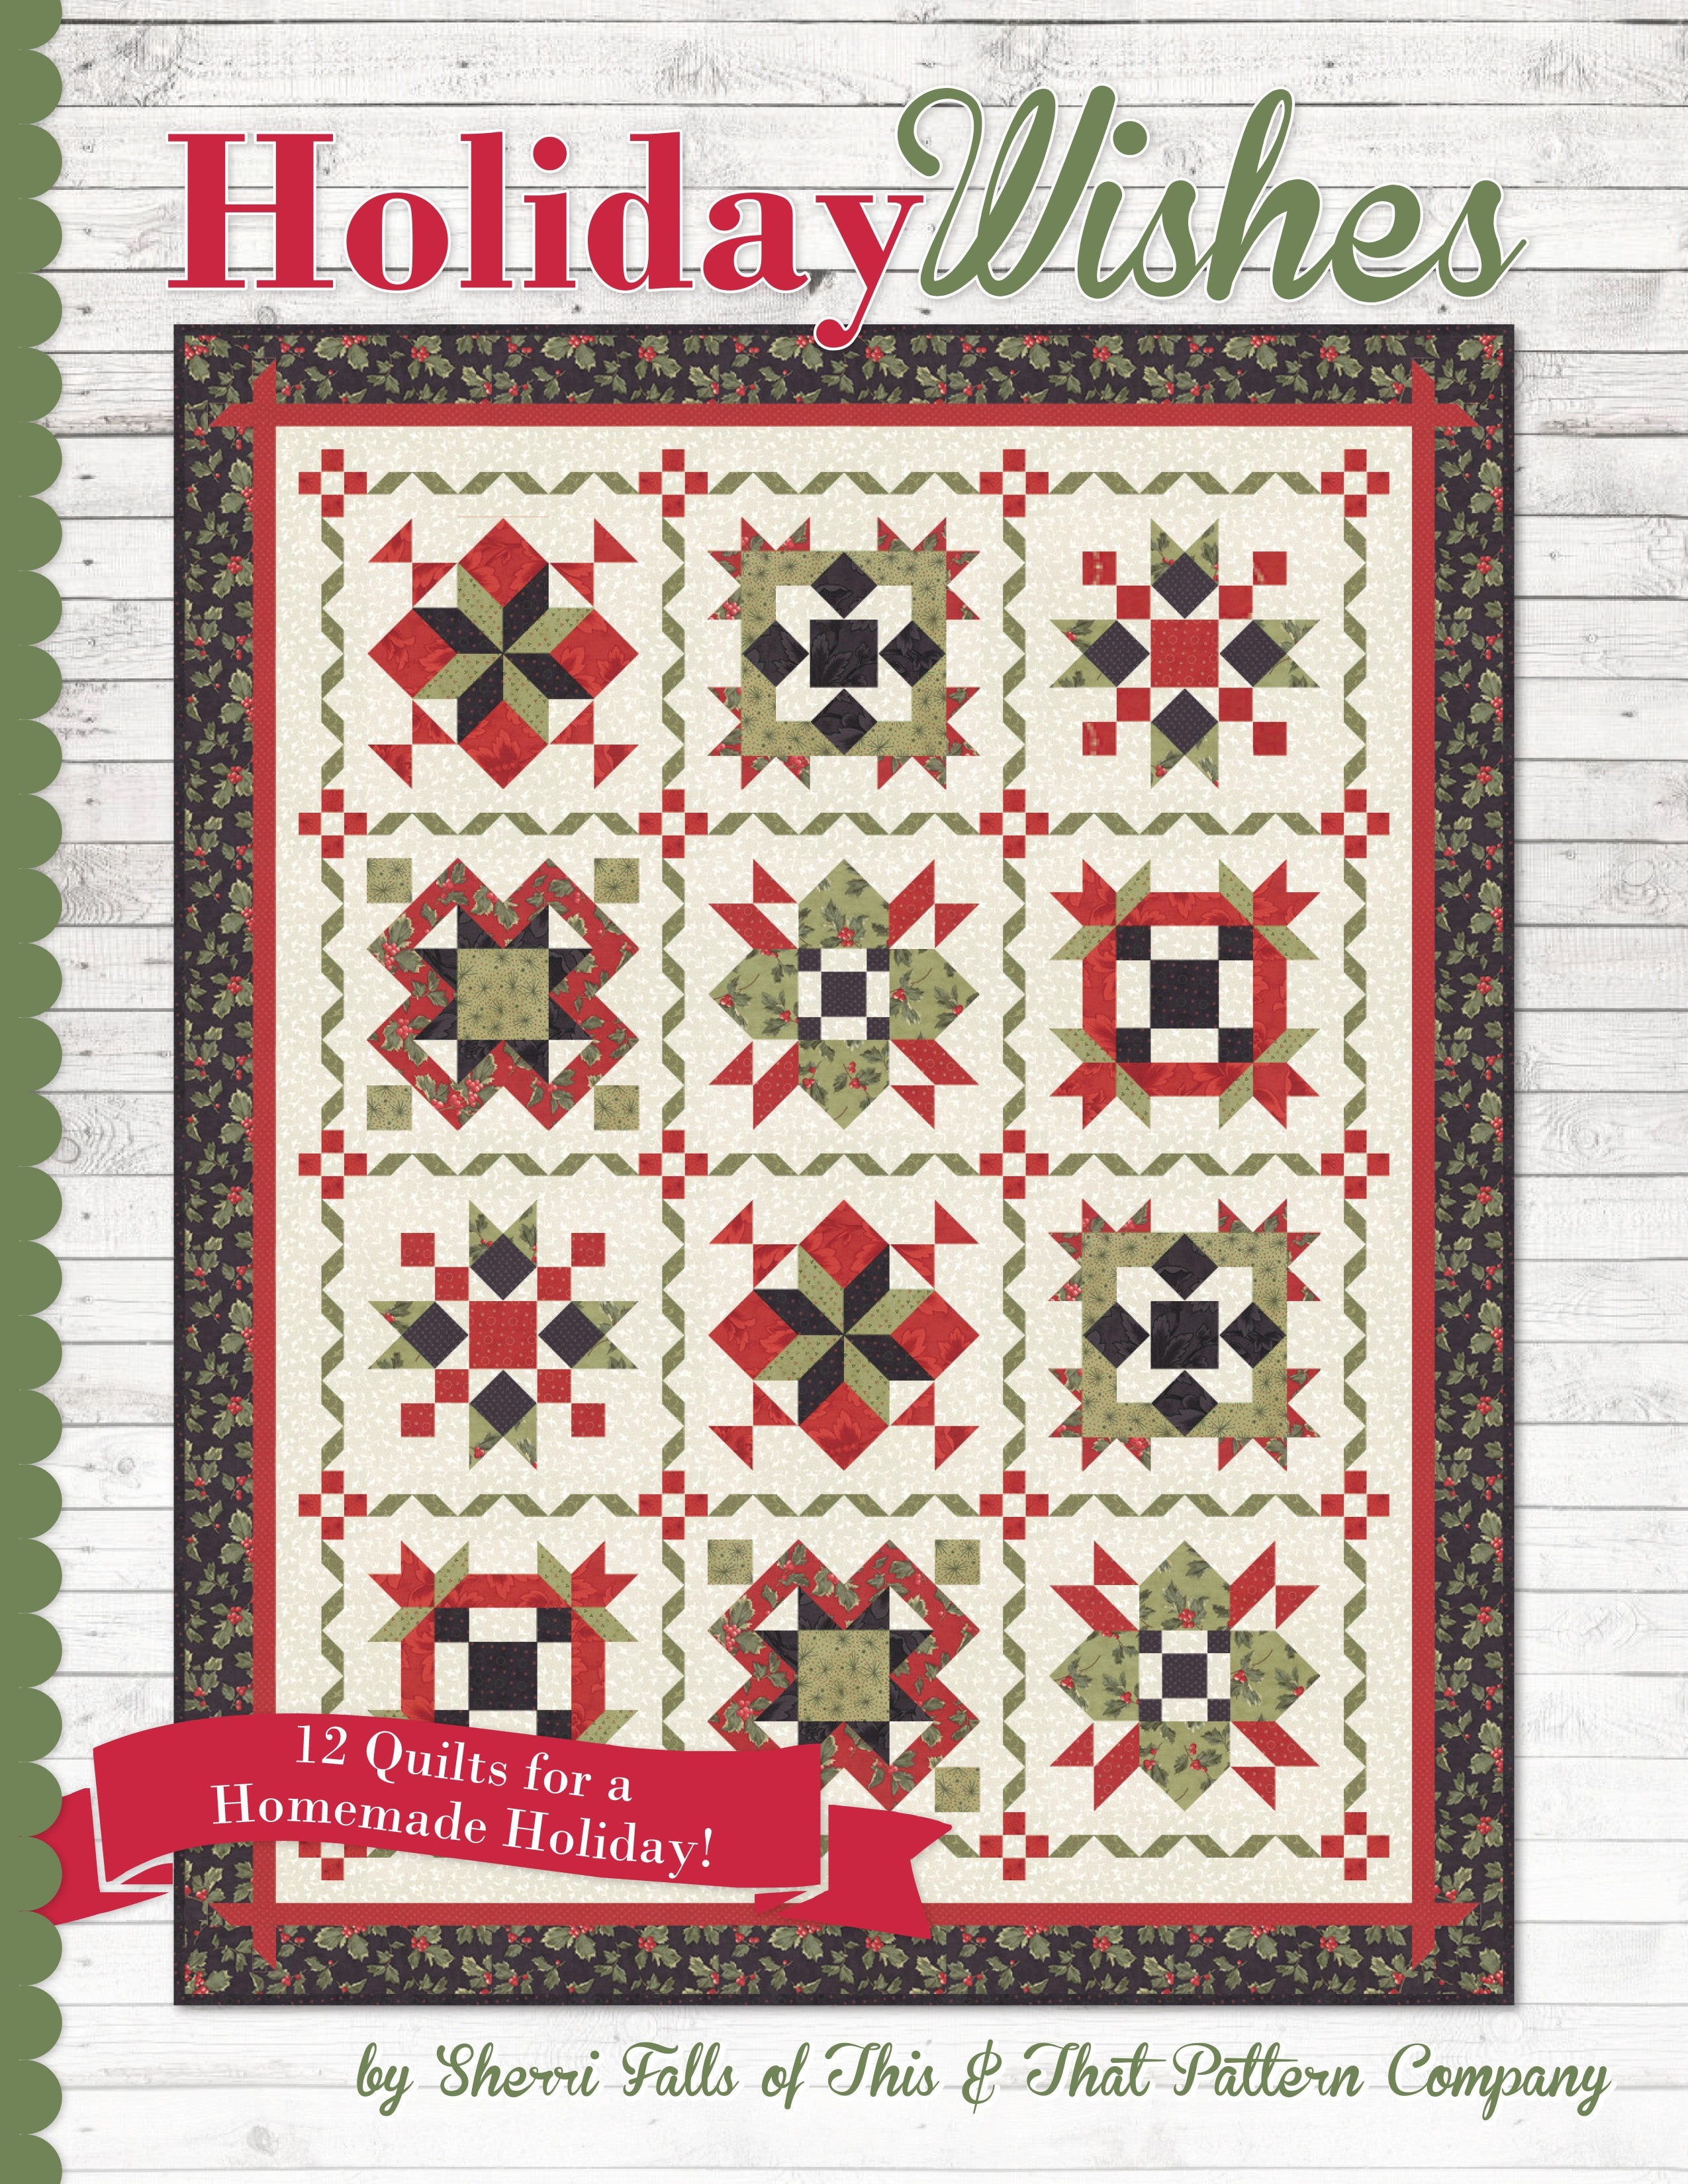 Vintage Christmas Quilt Pattern Book by Lori Holt for It's Sew Emma